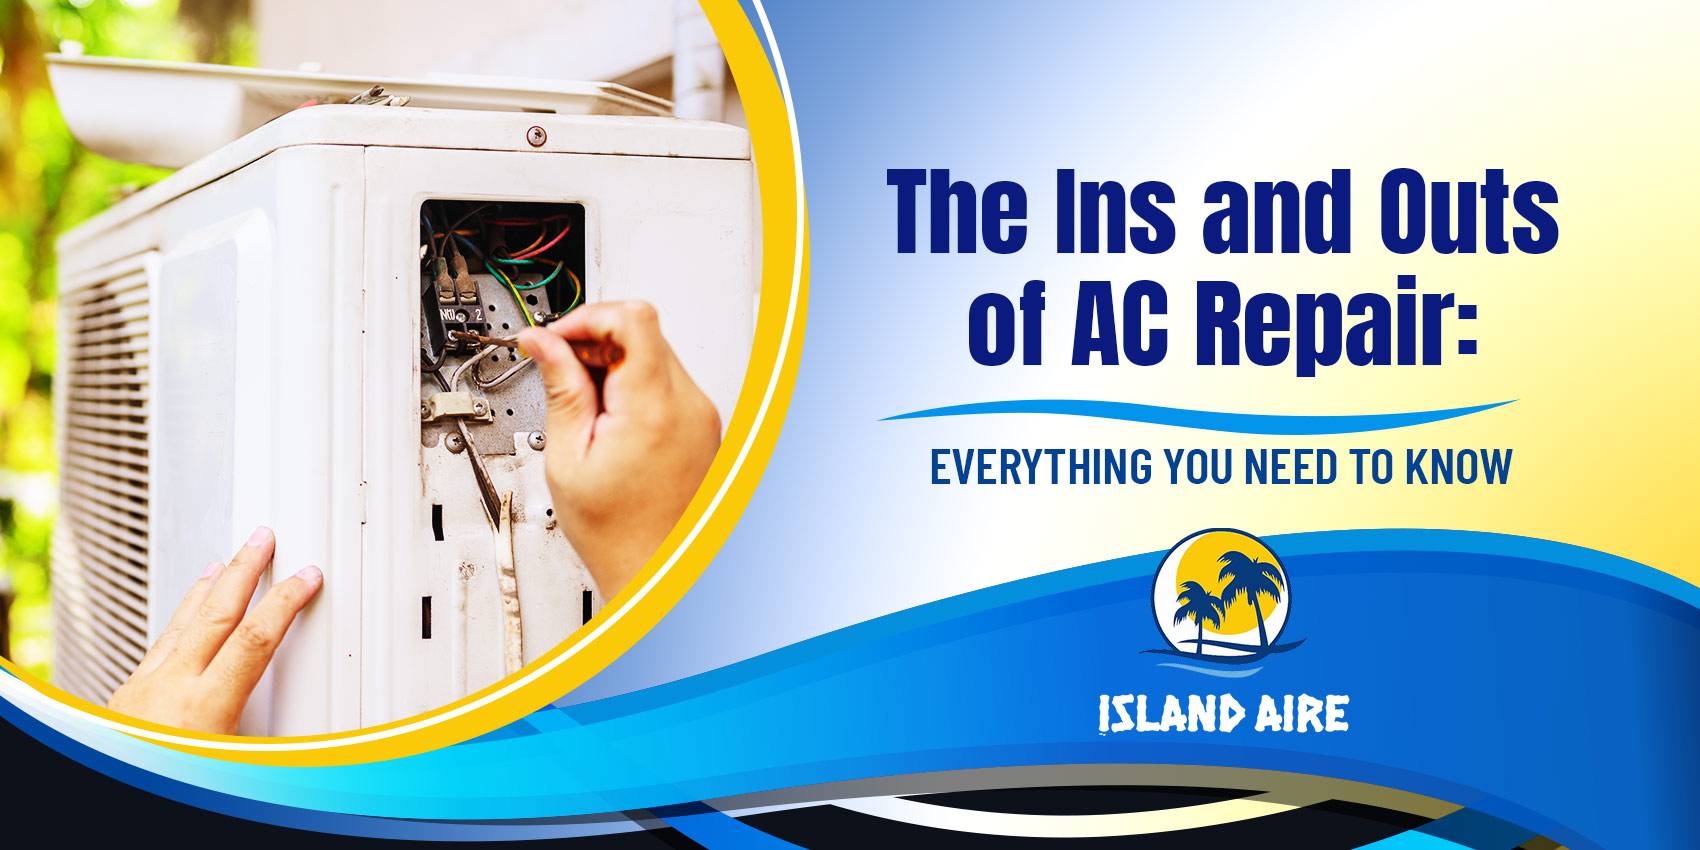 The Ins and Outs of AC Repair: Everything You Need to Know